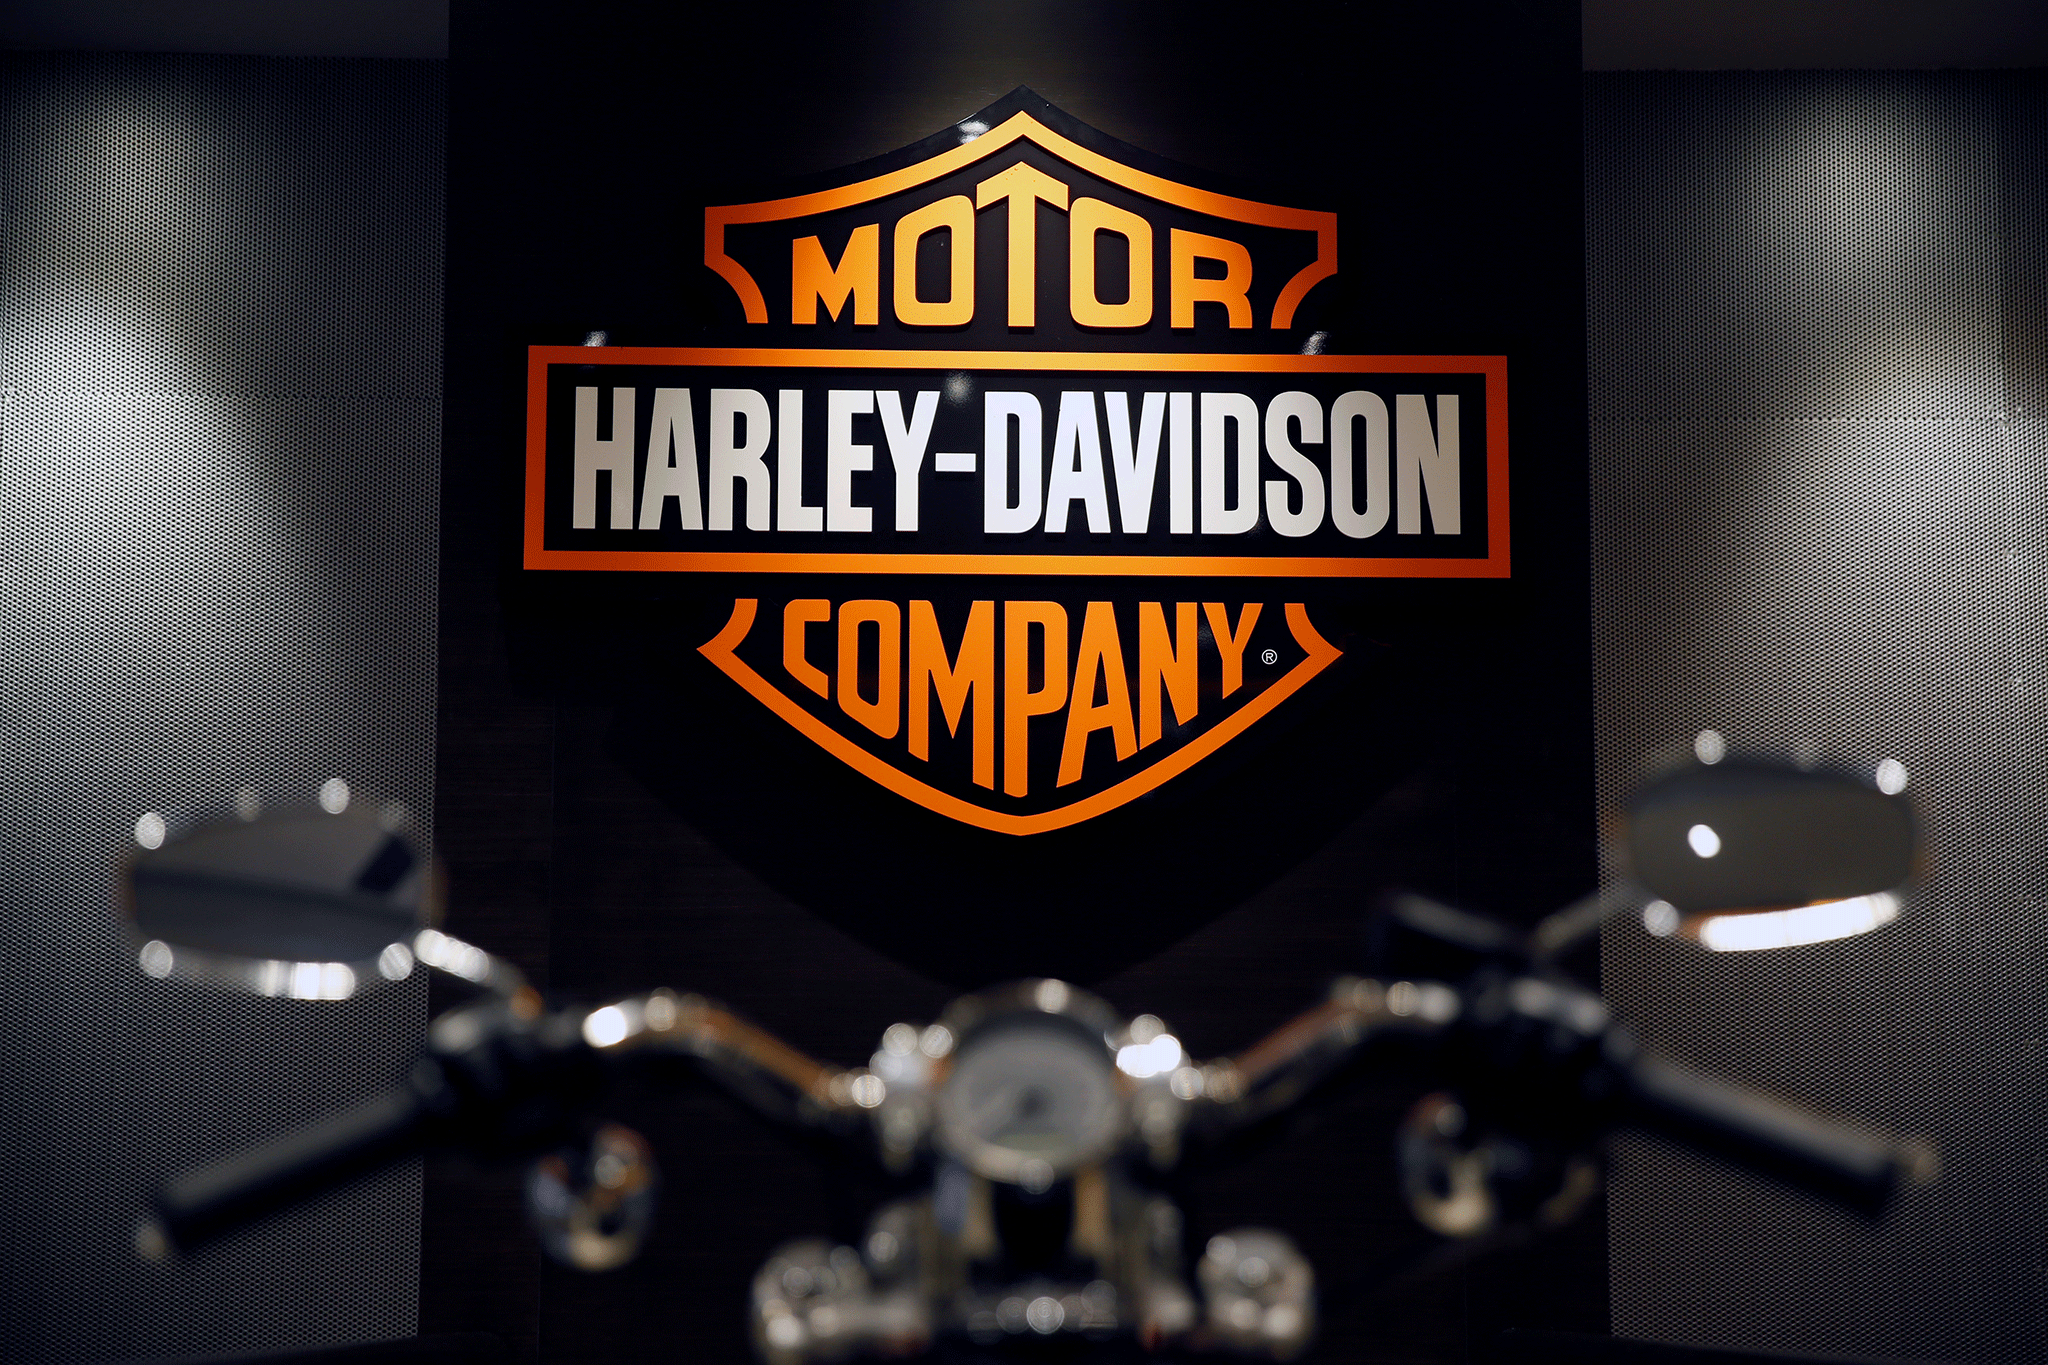  Minority employees at a Harley-Davidson plant in Kansas City say they faced years of racial discrimination and harassment 